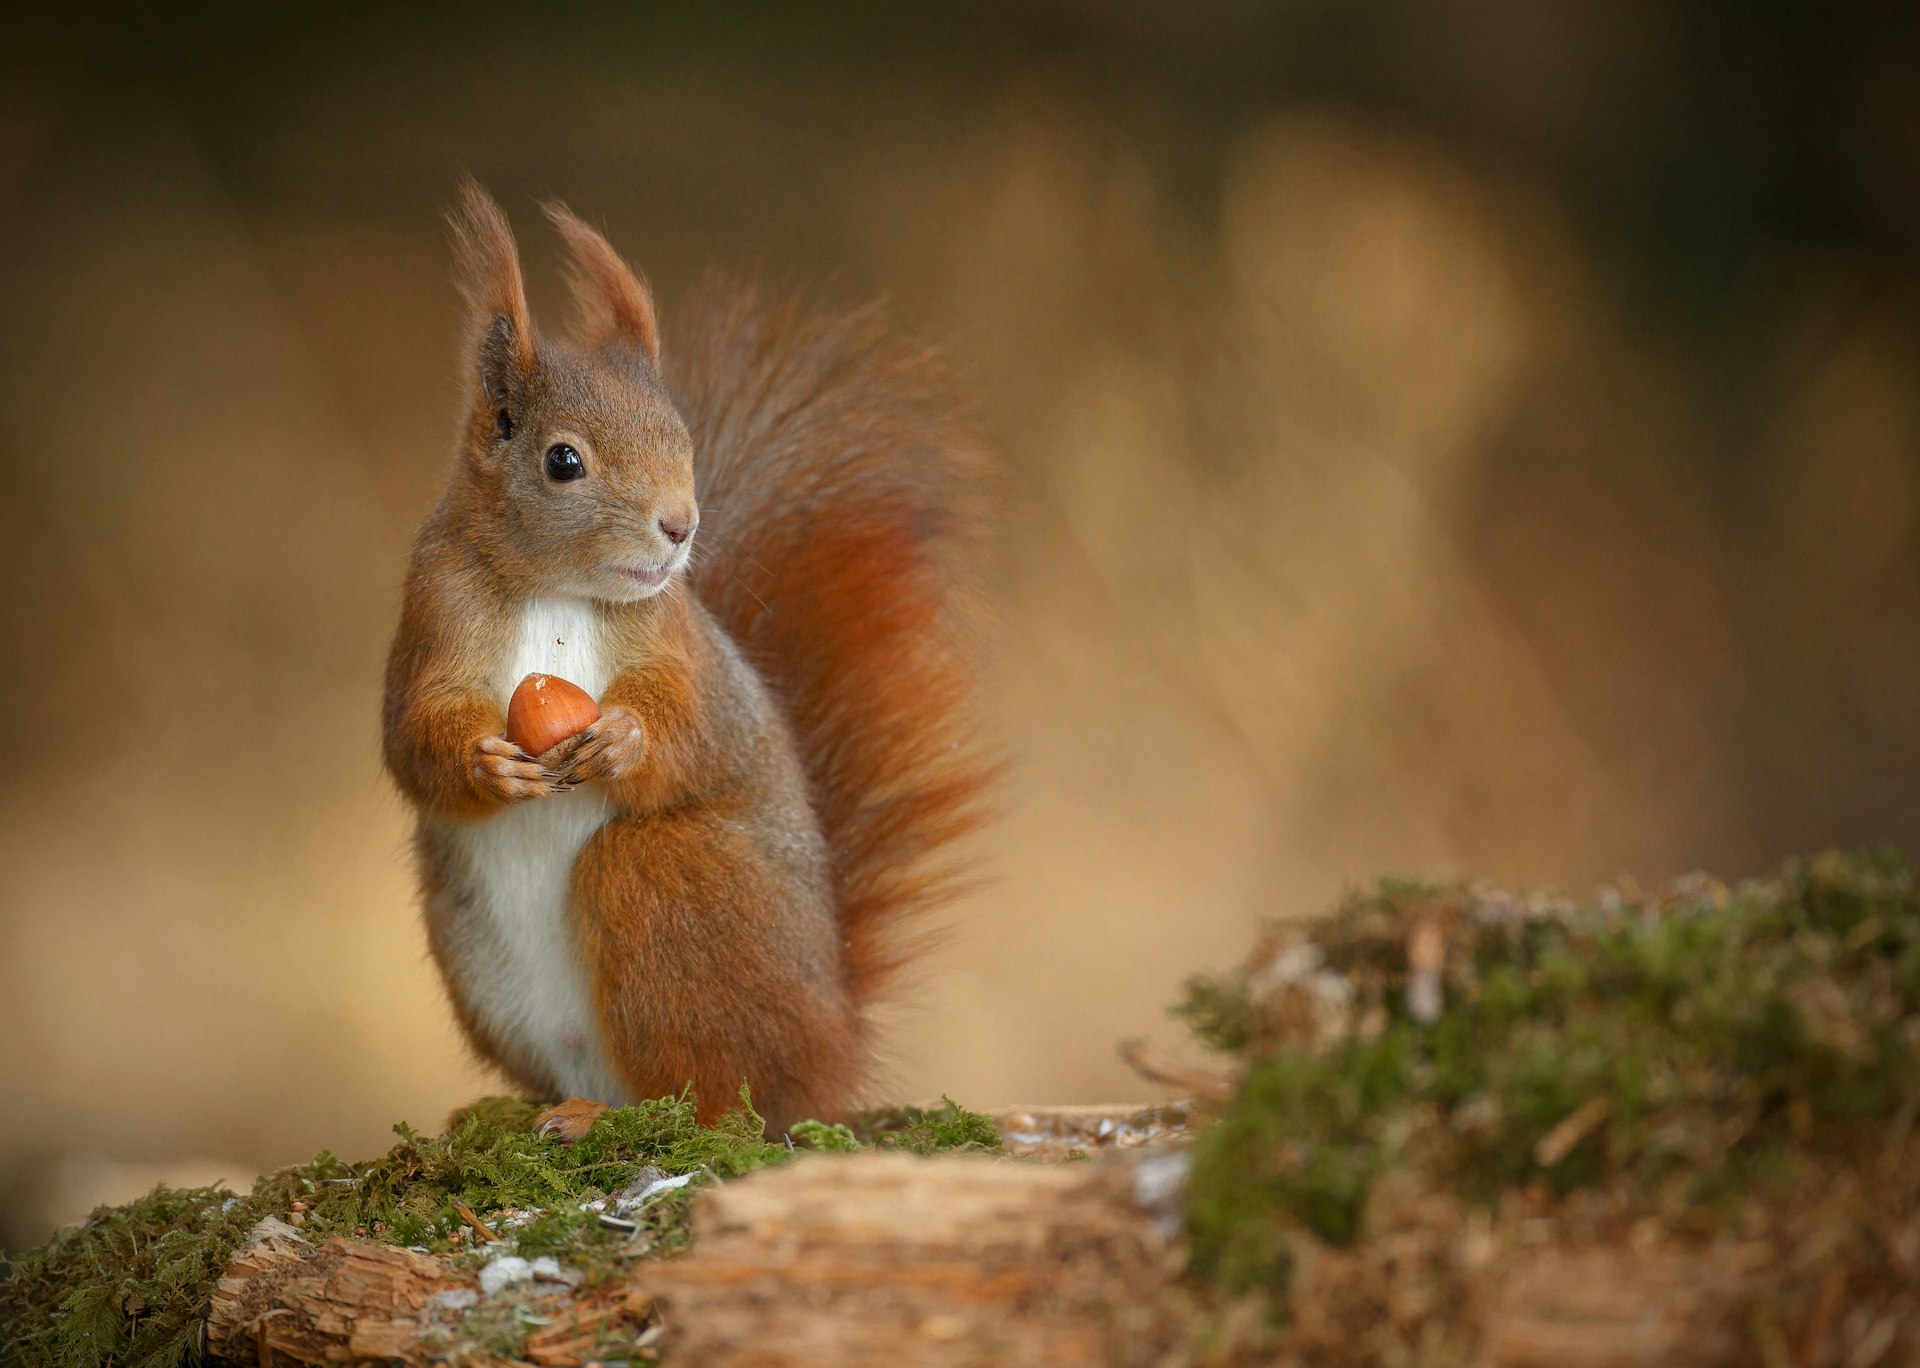 A red squirrel standing on a tree branch and holding a nut.